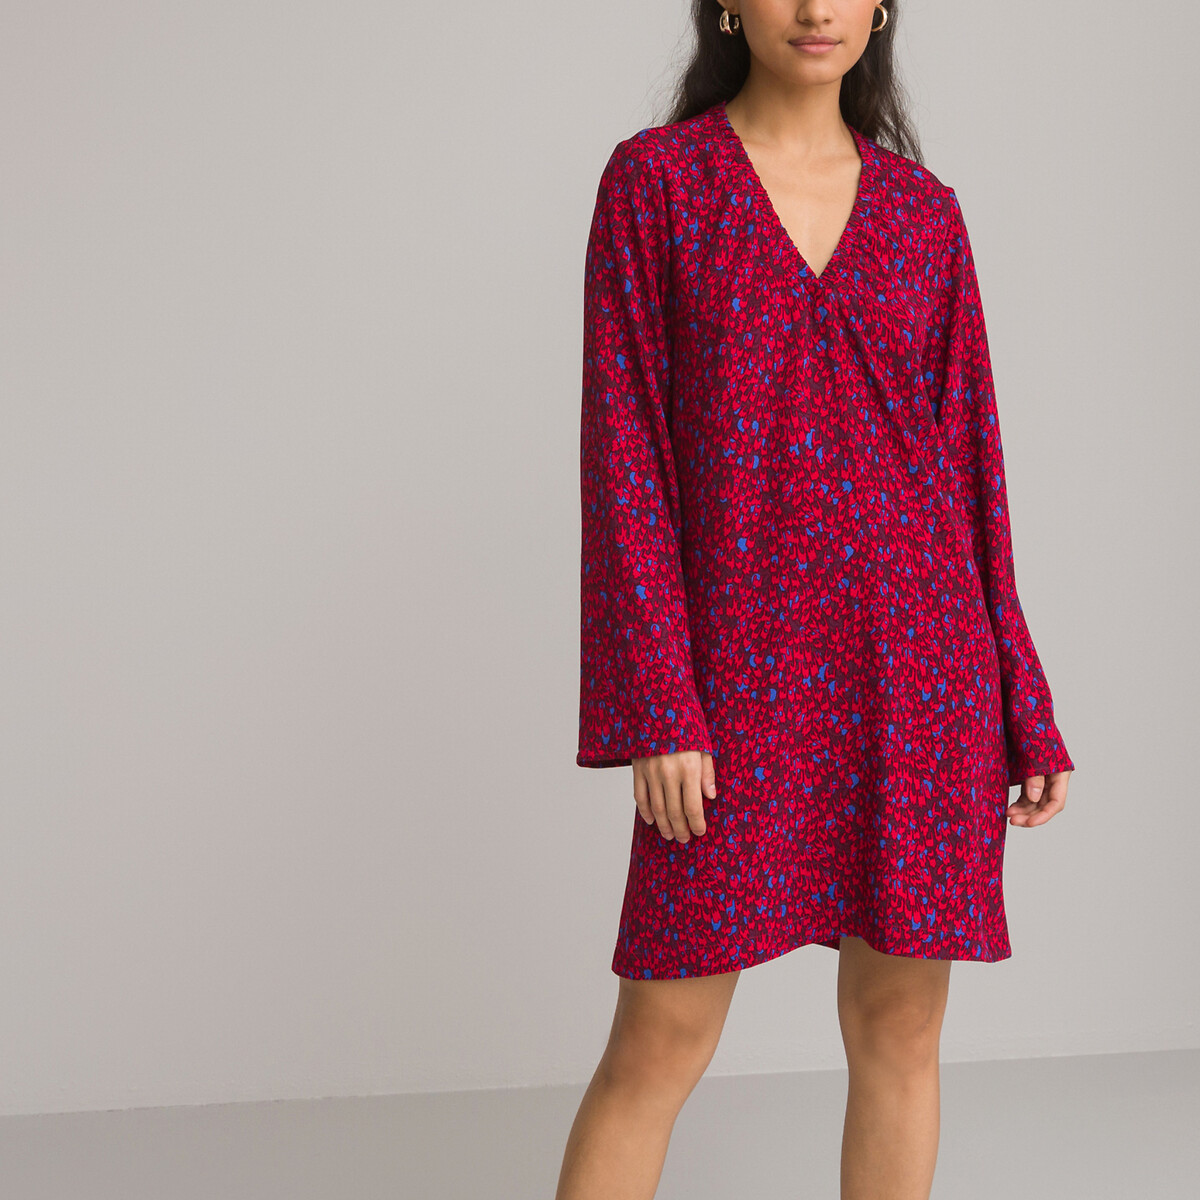 Full Mini Dress with V-Neck and Long Sleeves